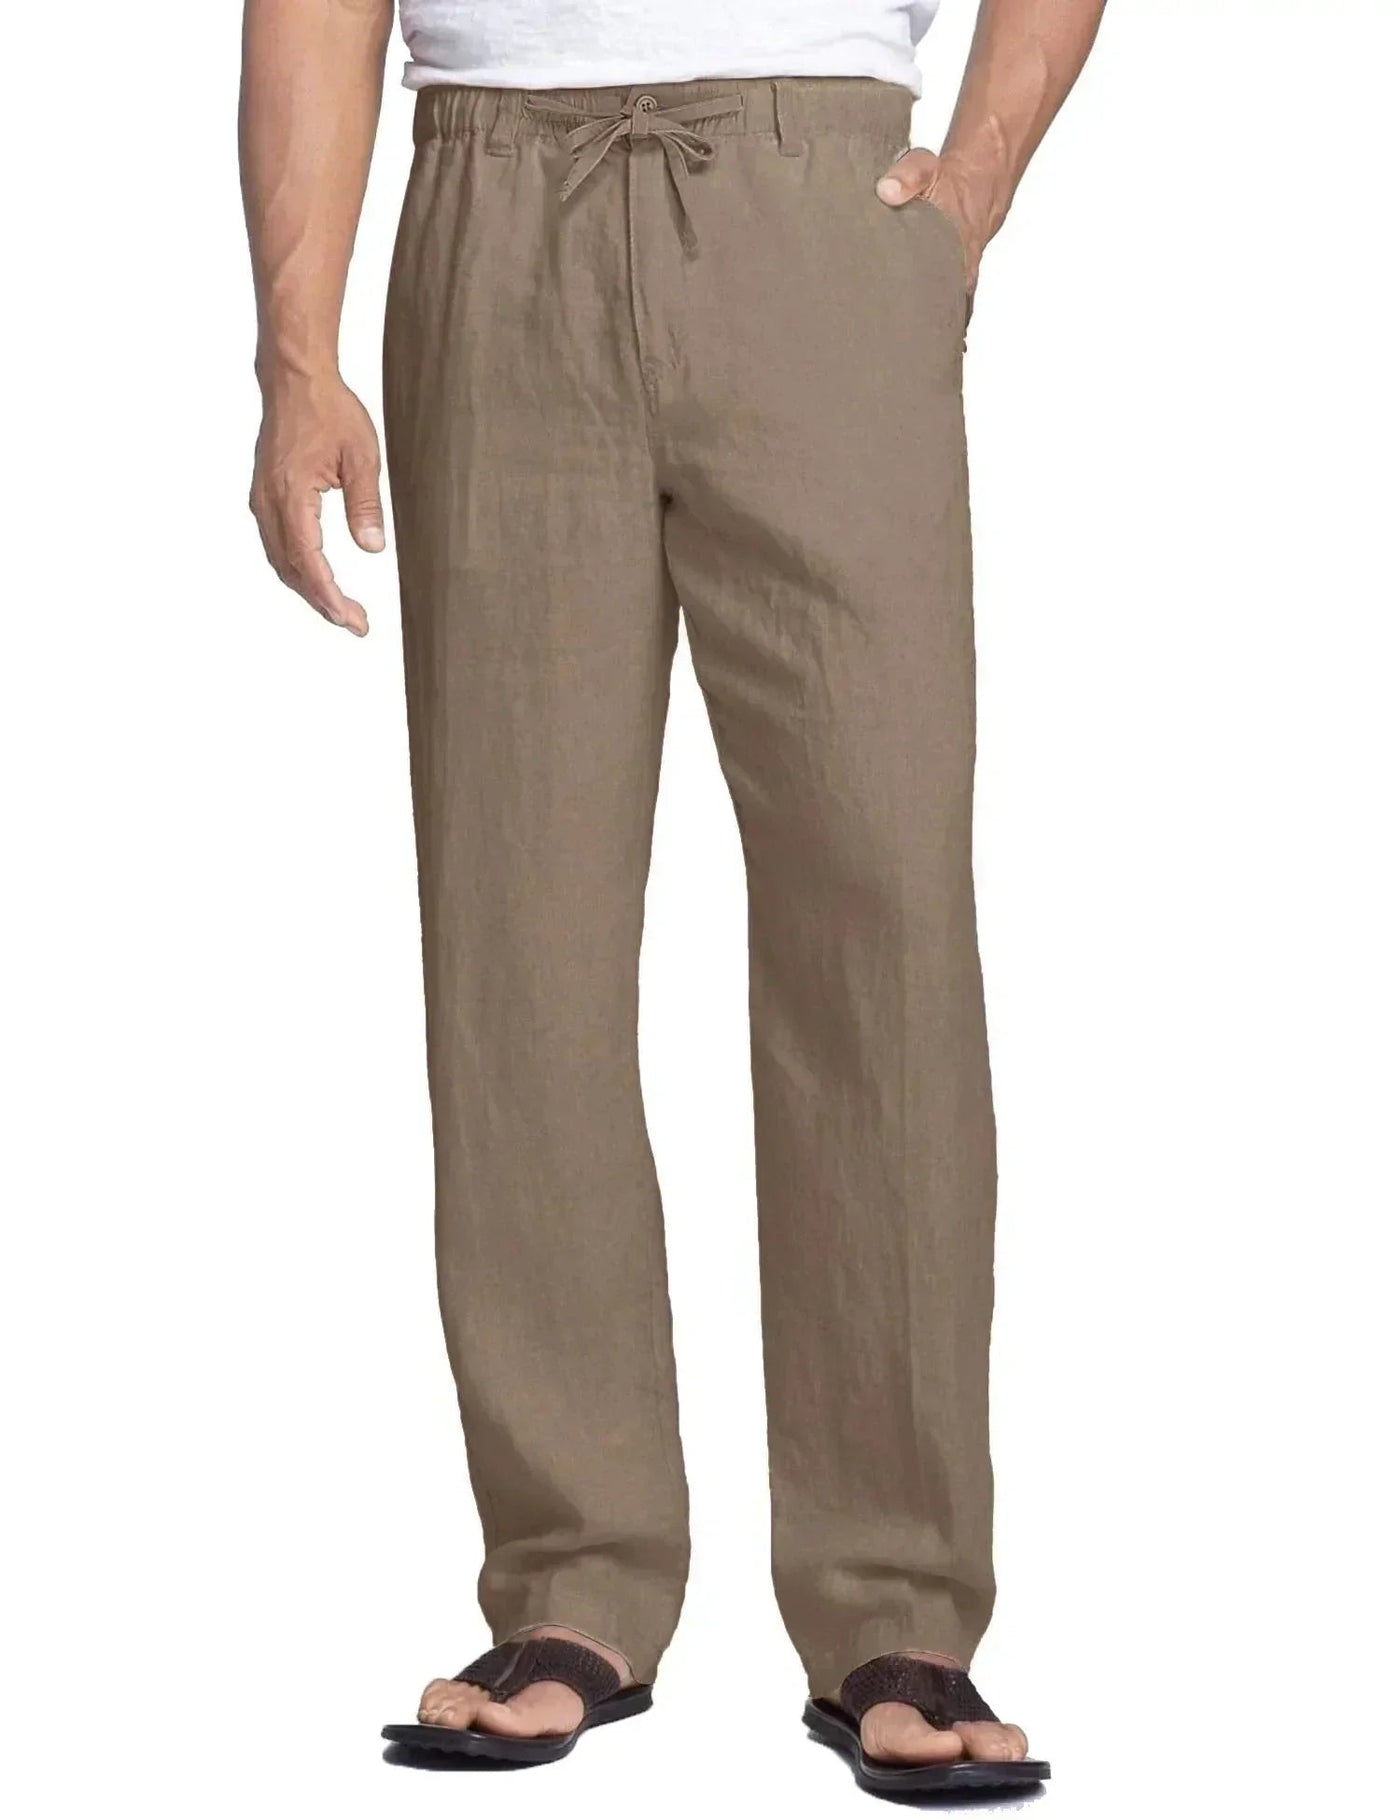 Coofandy Casual Cotton Style Trousers (US Only) Pants coofandy Light Brown S 